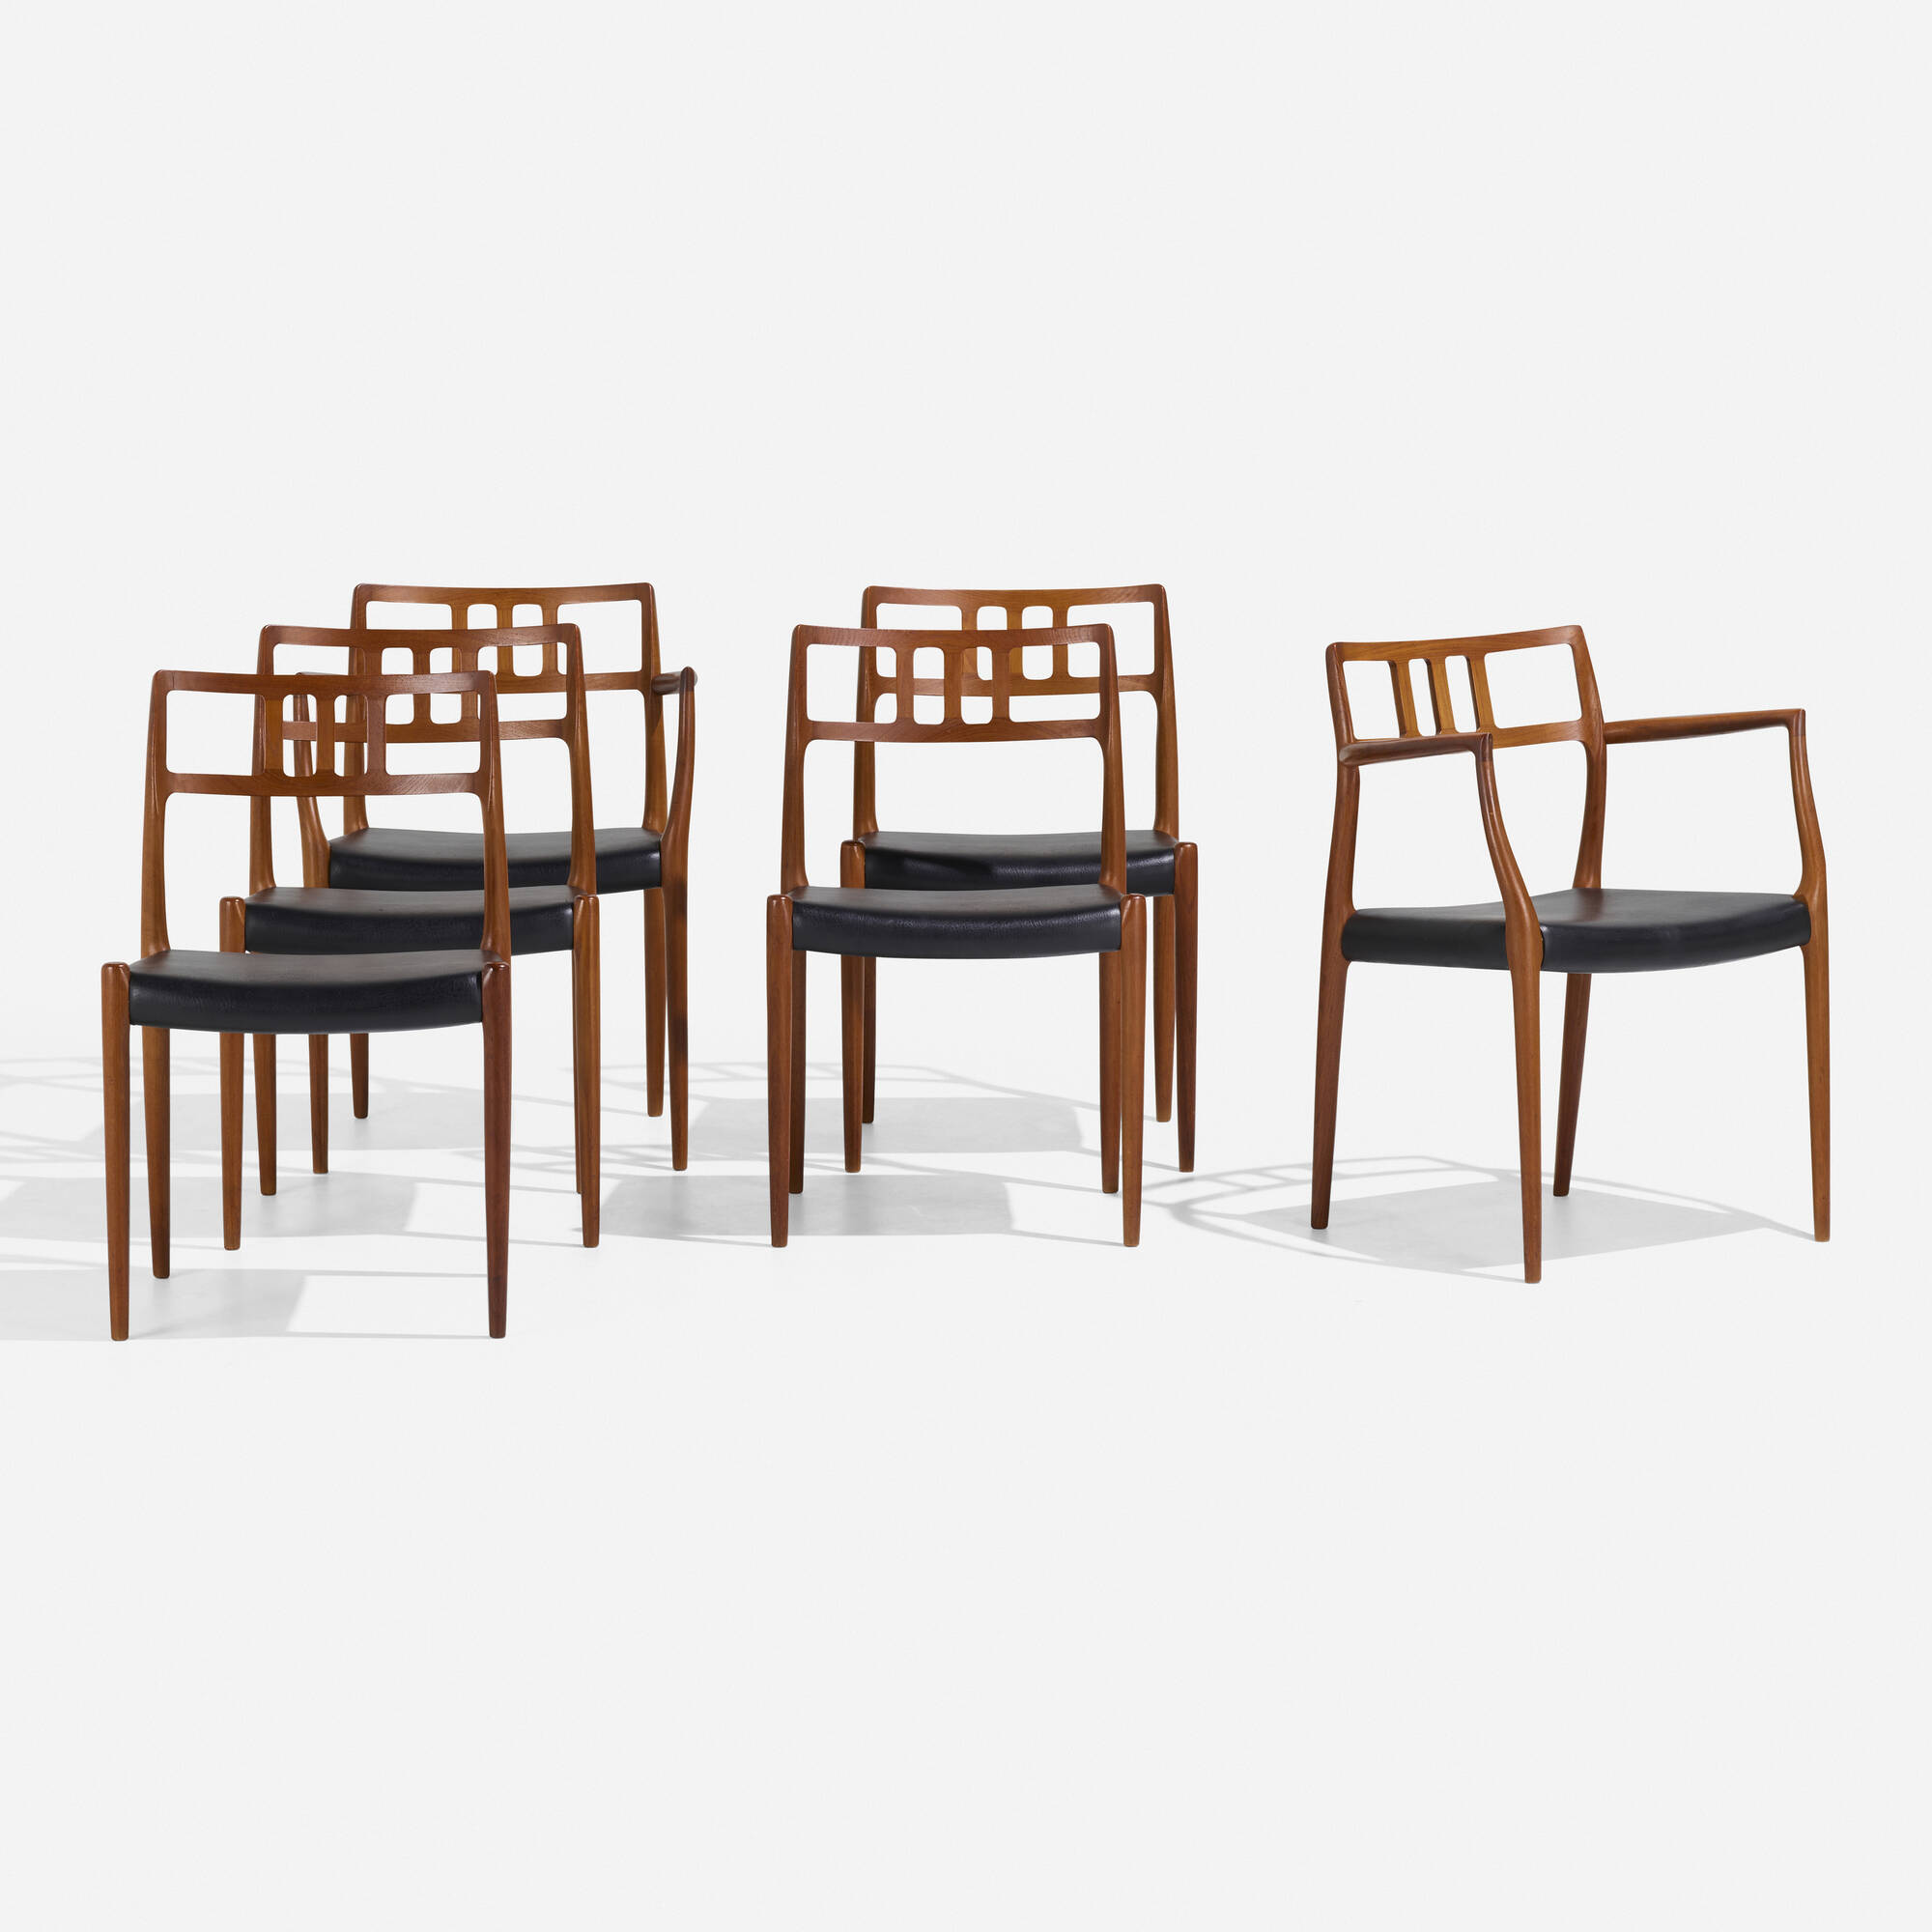 132: NIELS O. MØLLER, Dining chairs model 79, set of six 